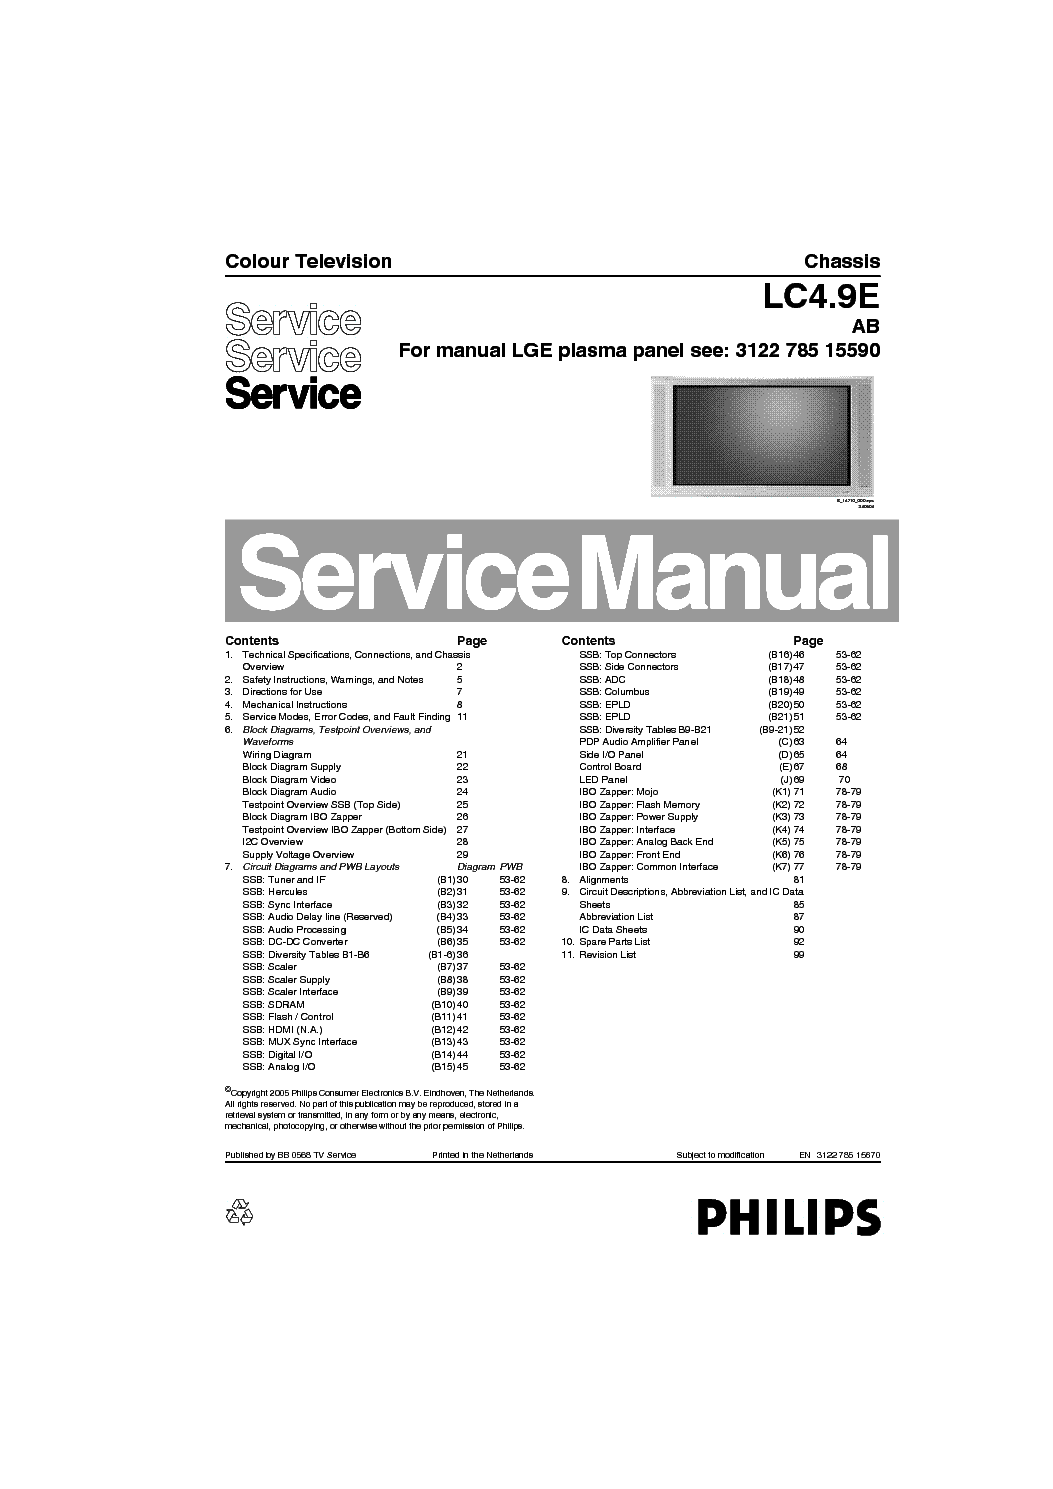 PHILIPS LC4.9E AB SM service manual (1st page)